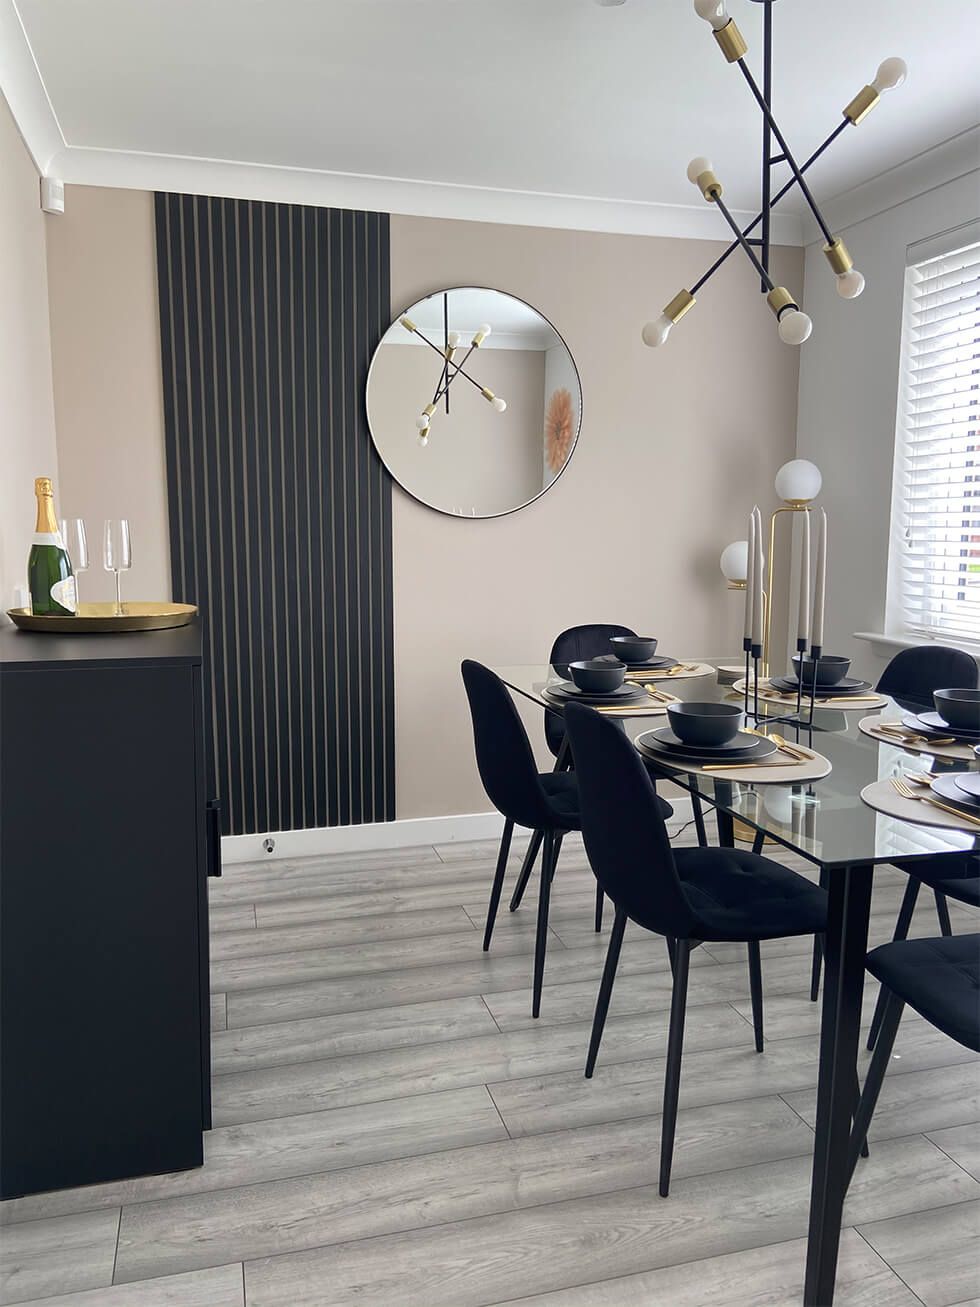 Contemporary dining room with black dining set and black accents